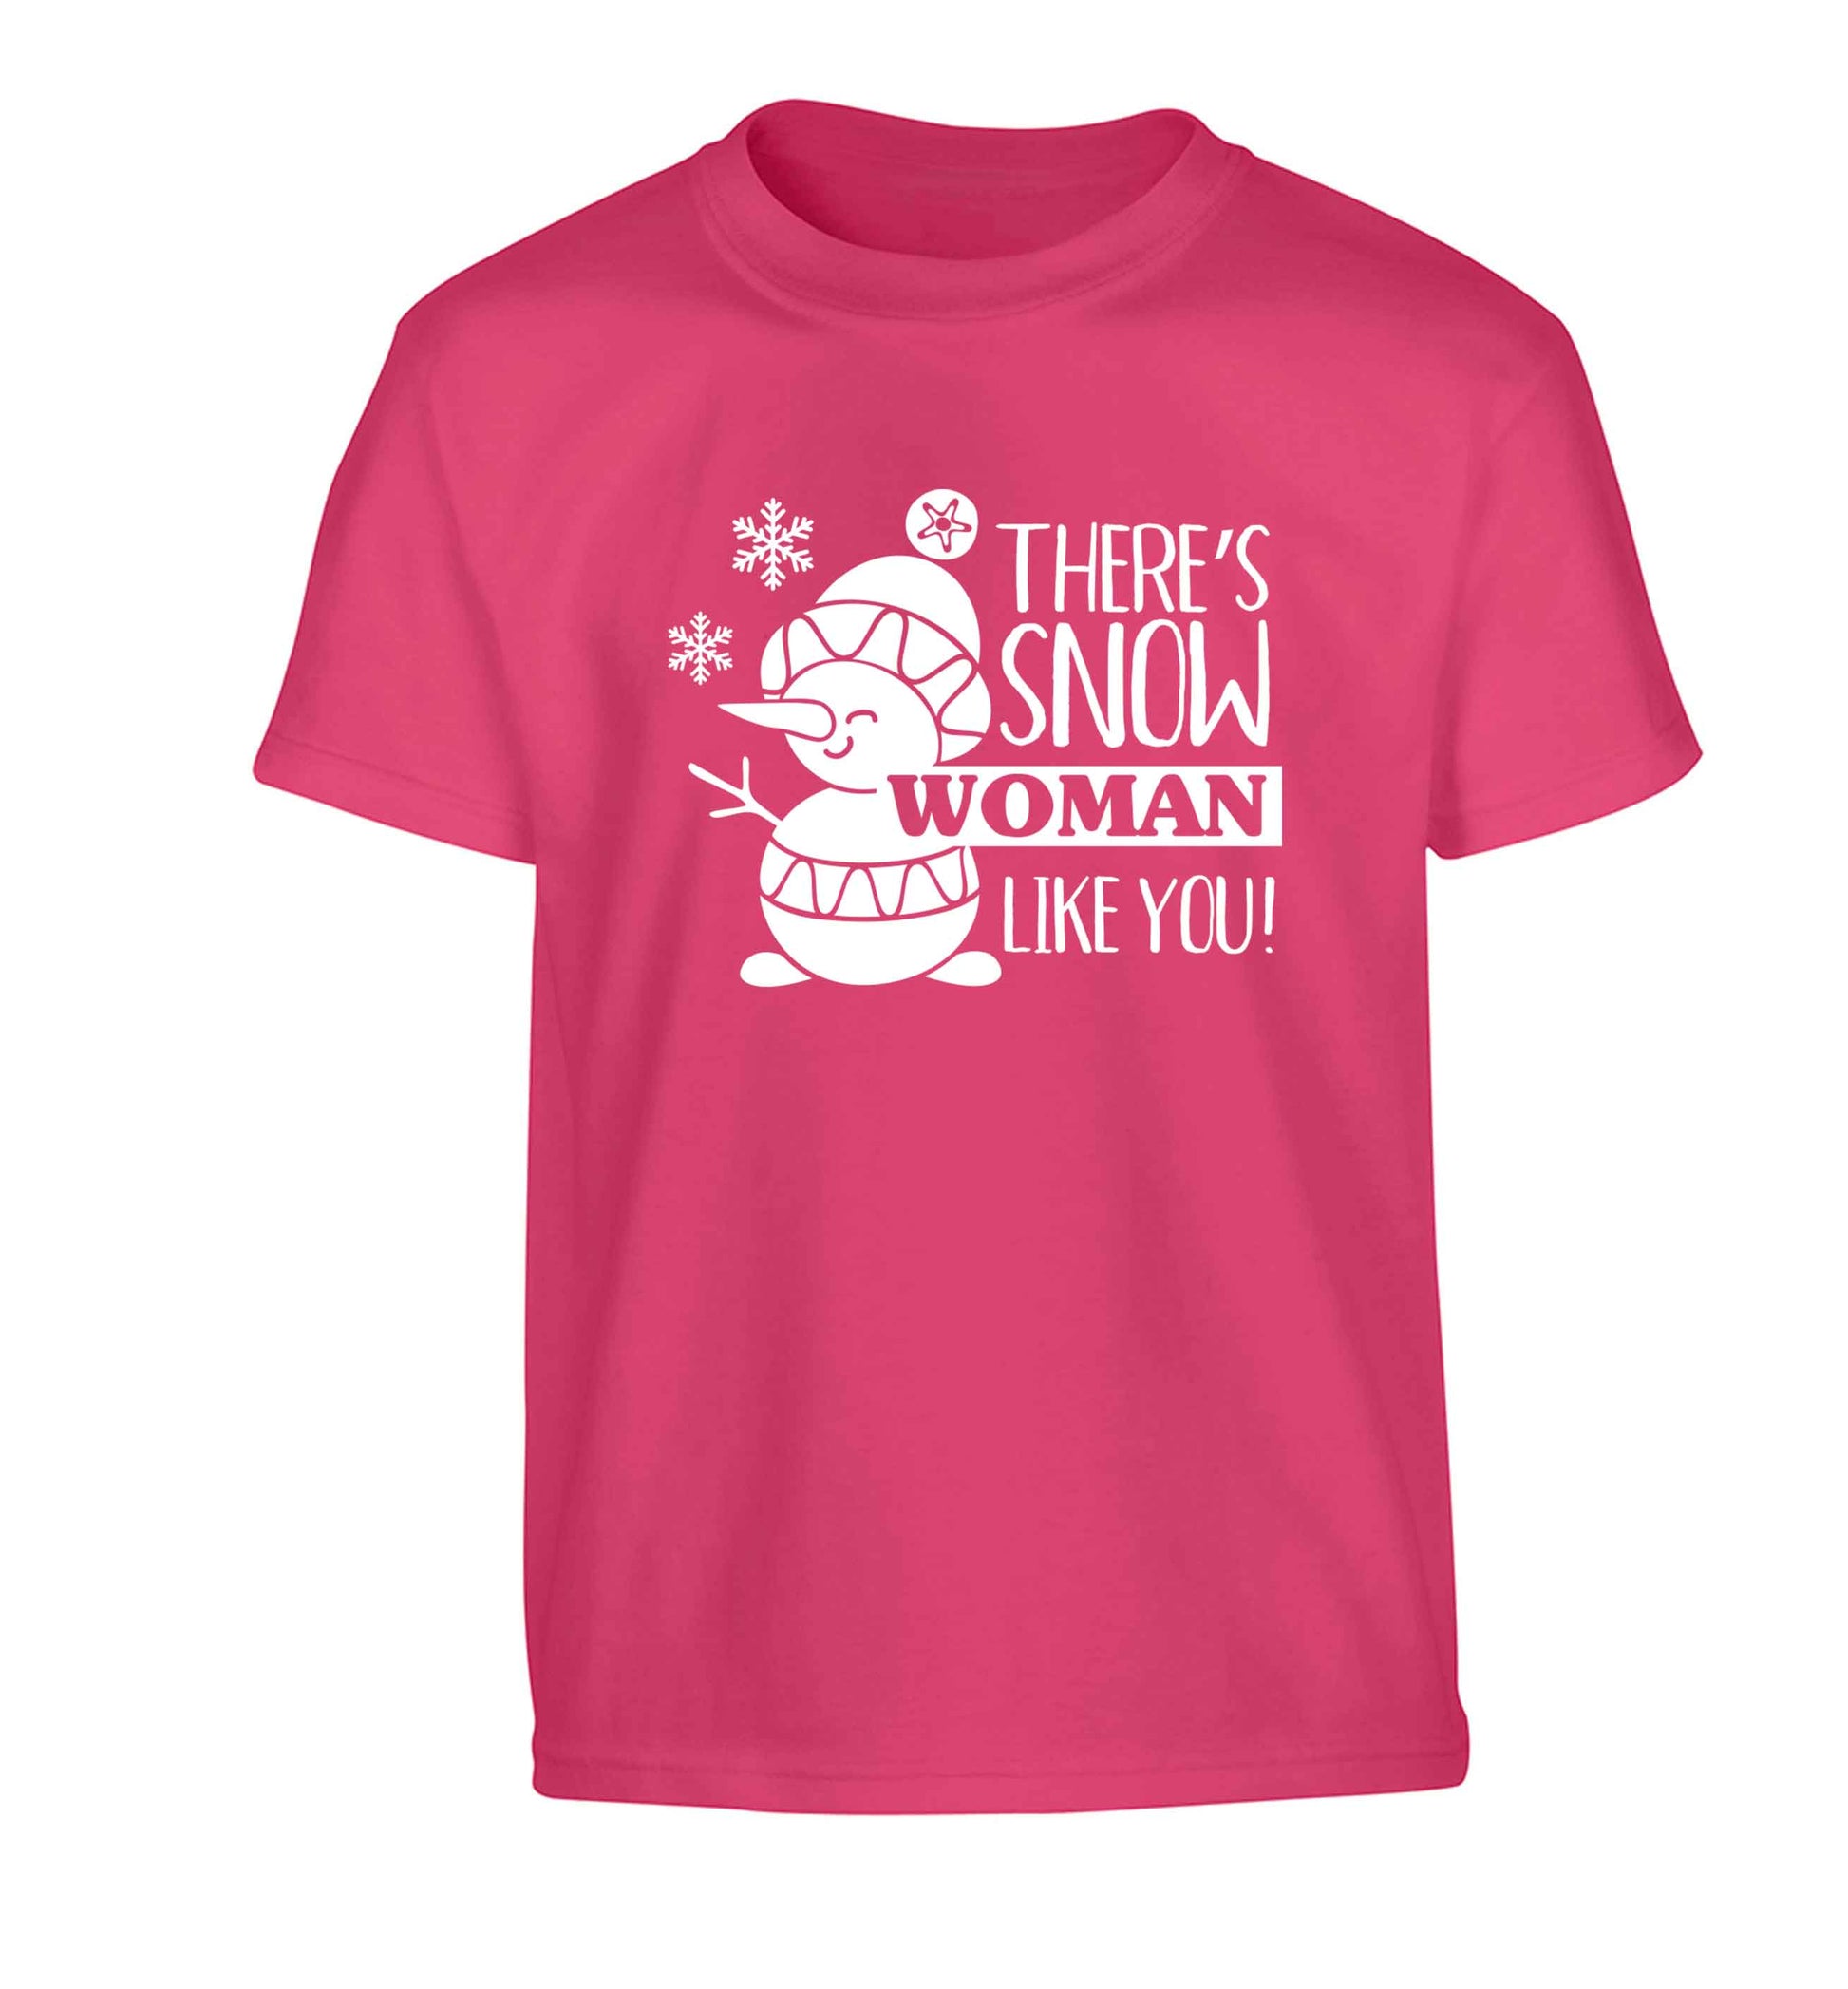 There's snow woman like you Children's pink Tshirt 12-13 Years